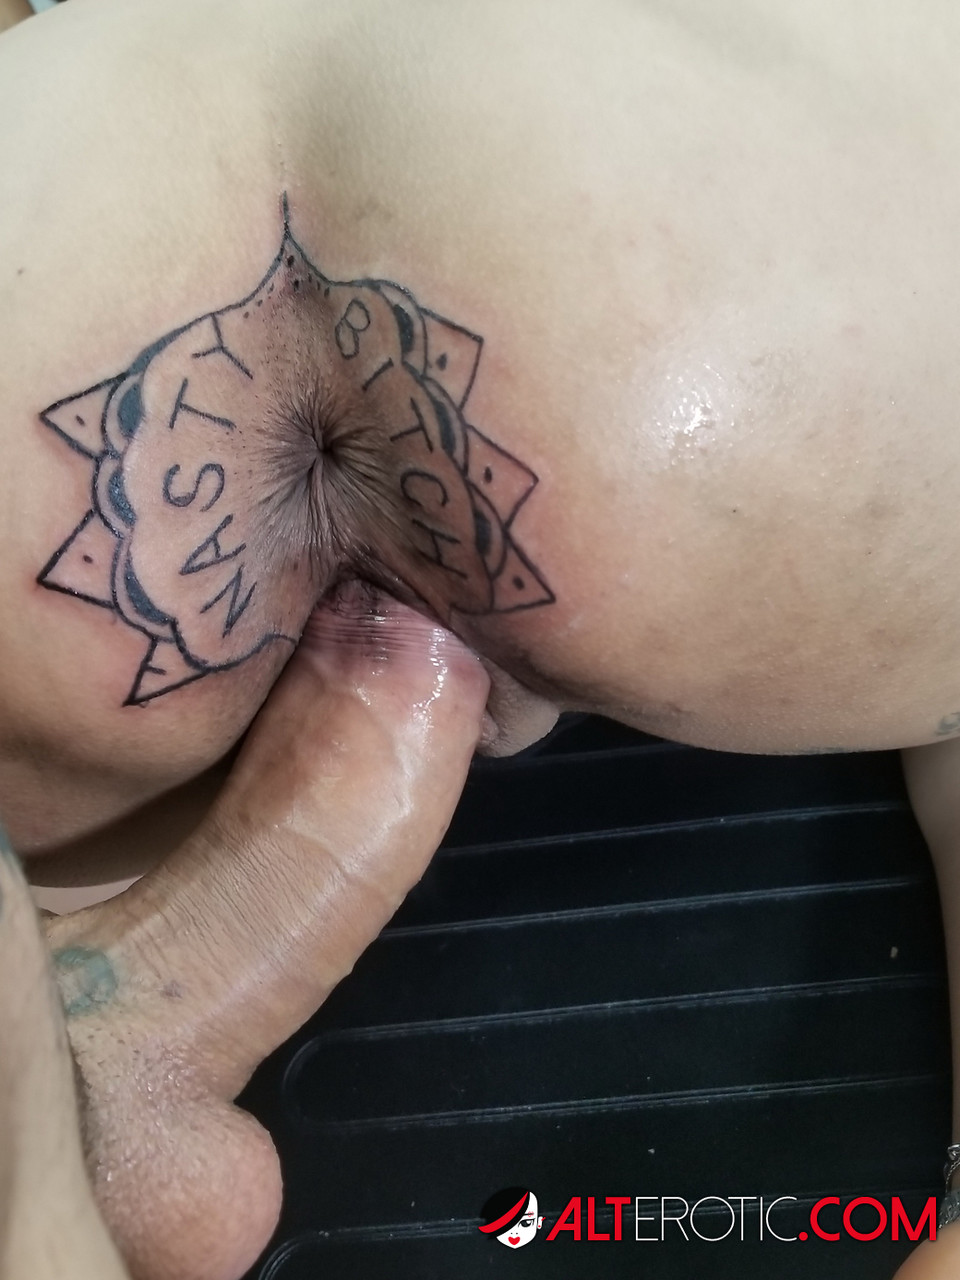 Latina chick Kitty Jaguar gets a butt tattoo before being fucked 포르노 사진 #424168461 | Alt Erotic Pics, Kitty Jaguar, Tattoo, 모바일 포르노